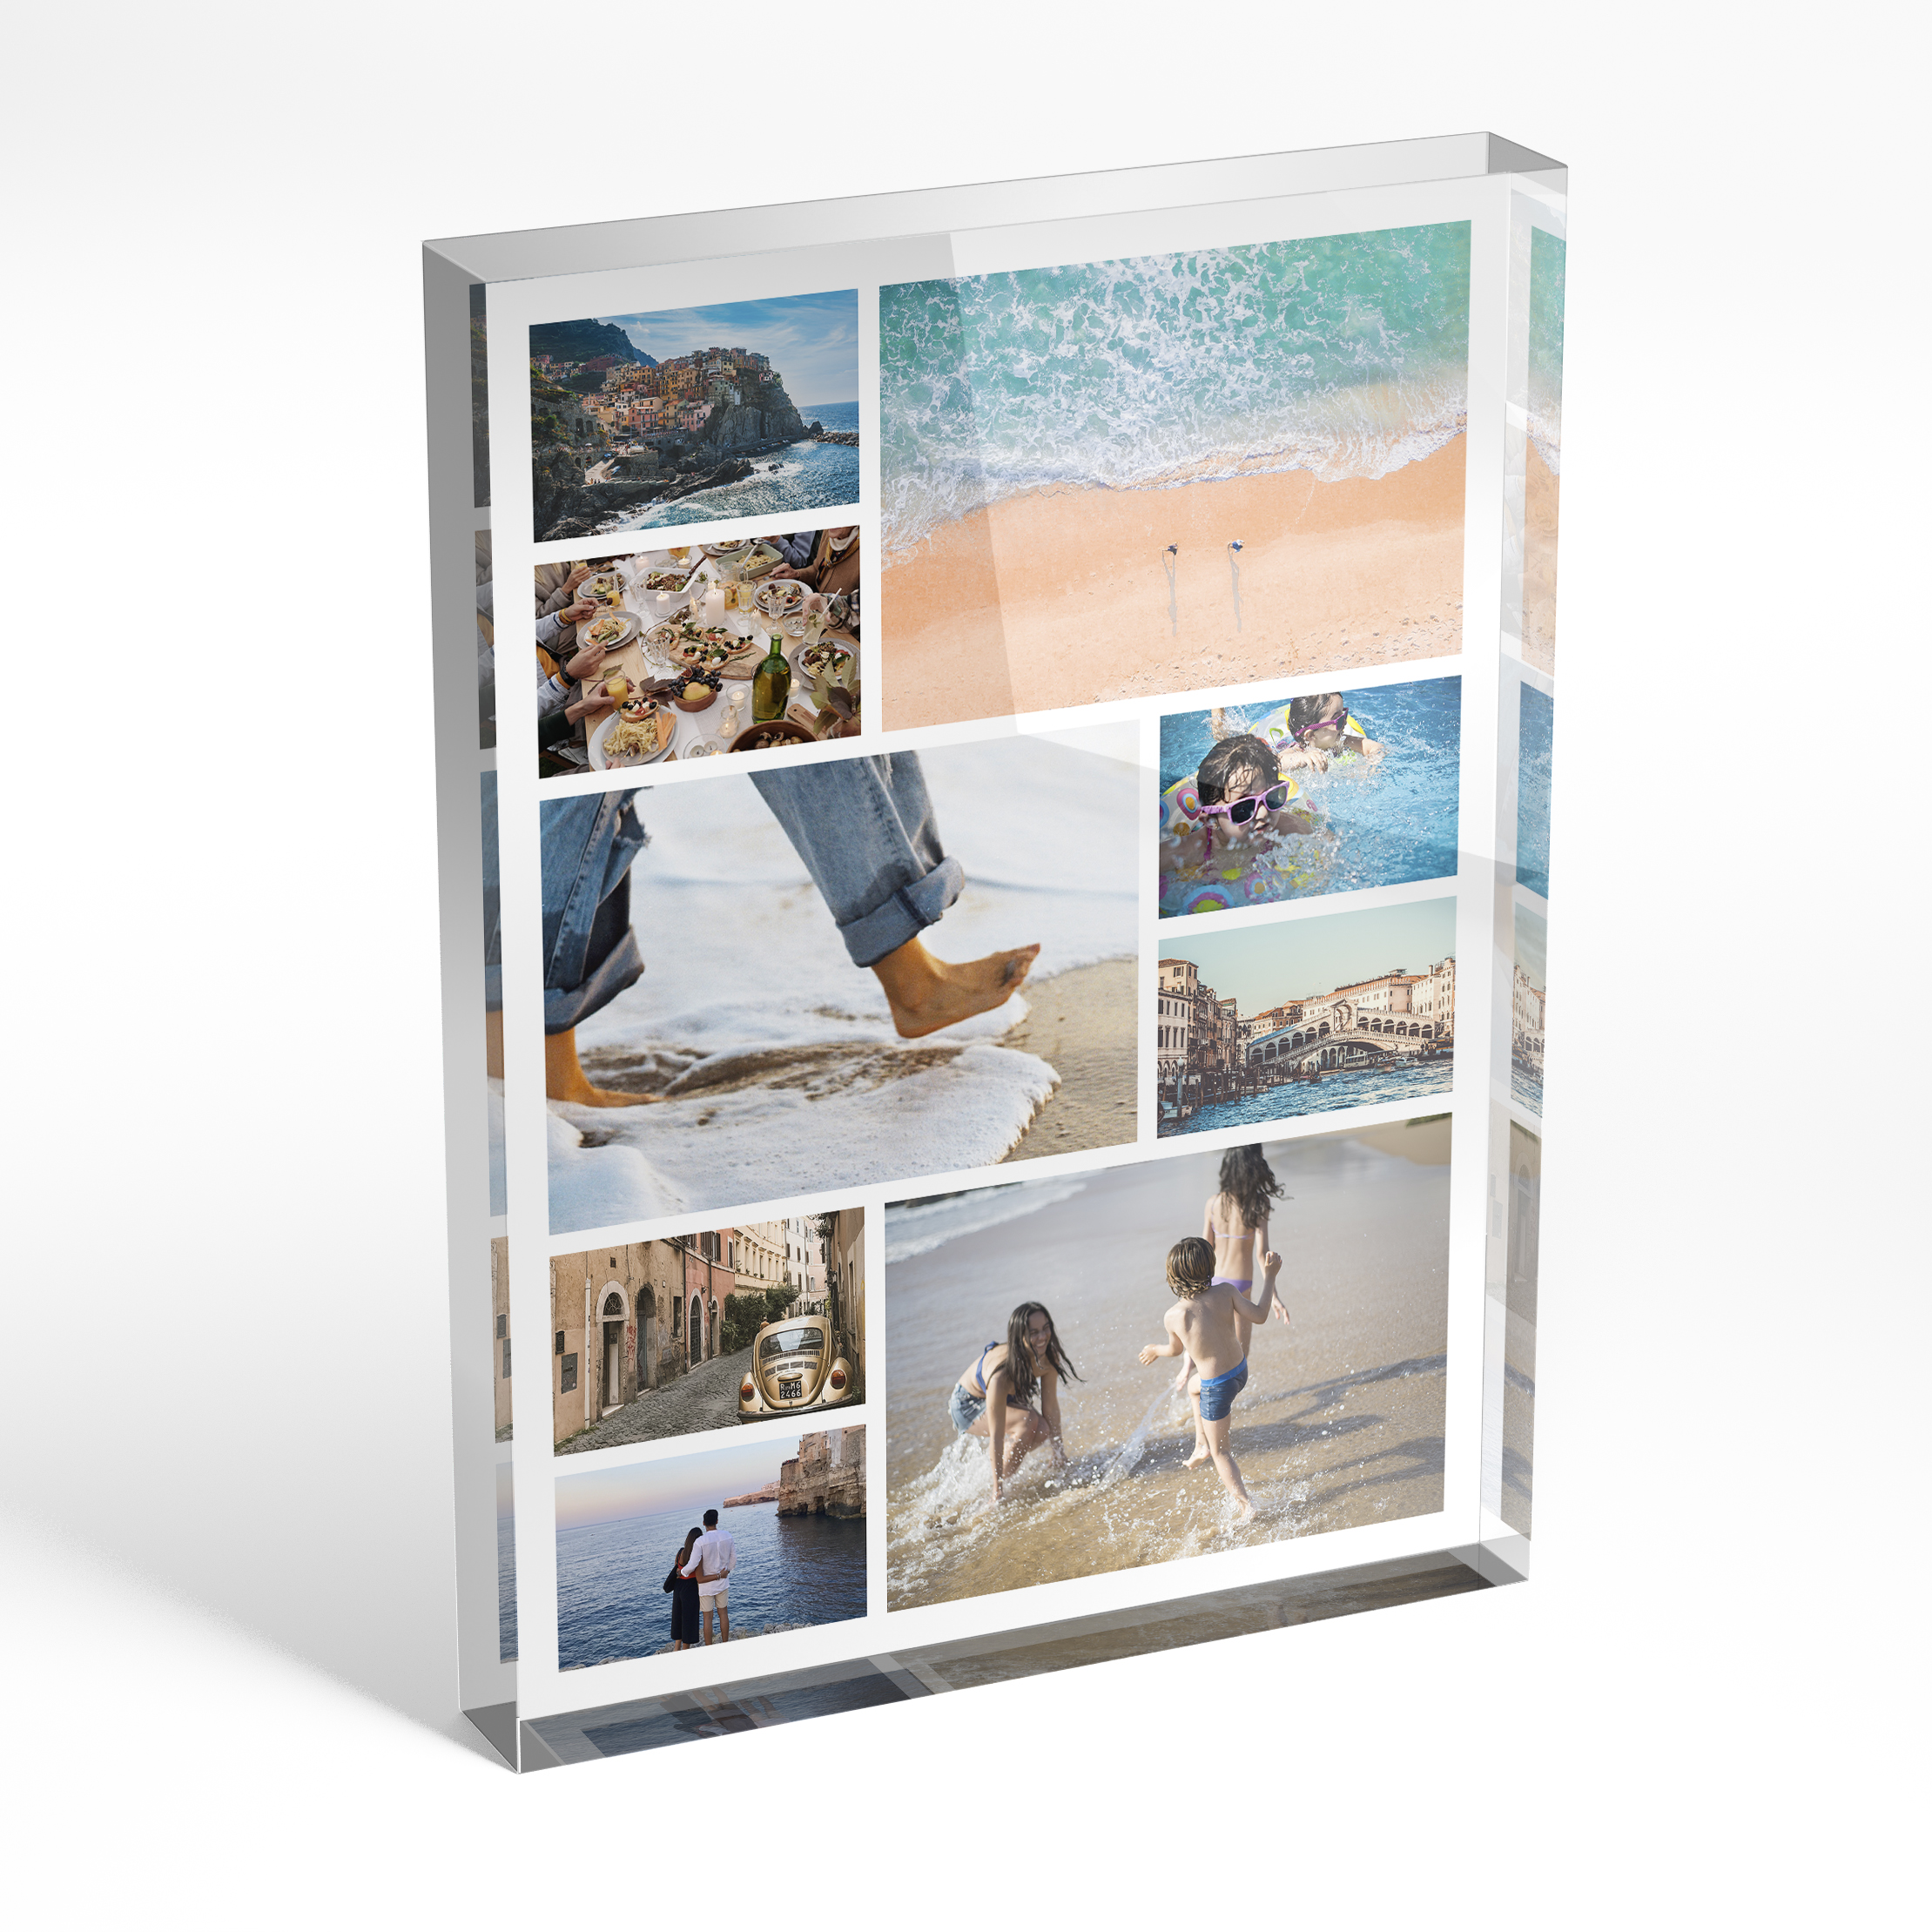 A front side view of a portrait layout Acrylic Photo Block with space for 9 photos. Thiis design is named 'Festive Harmony'. 